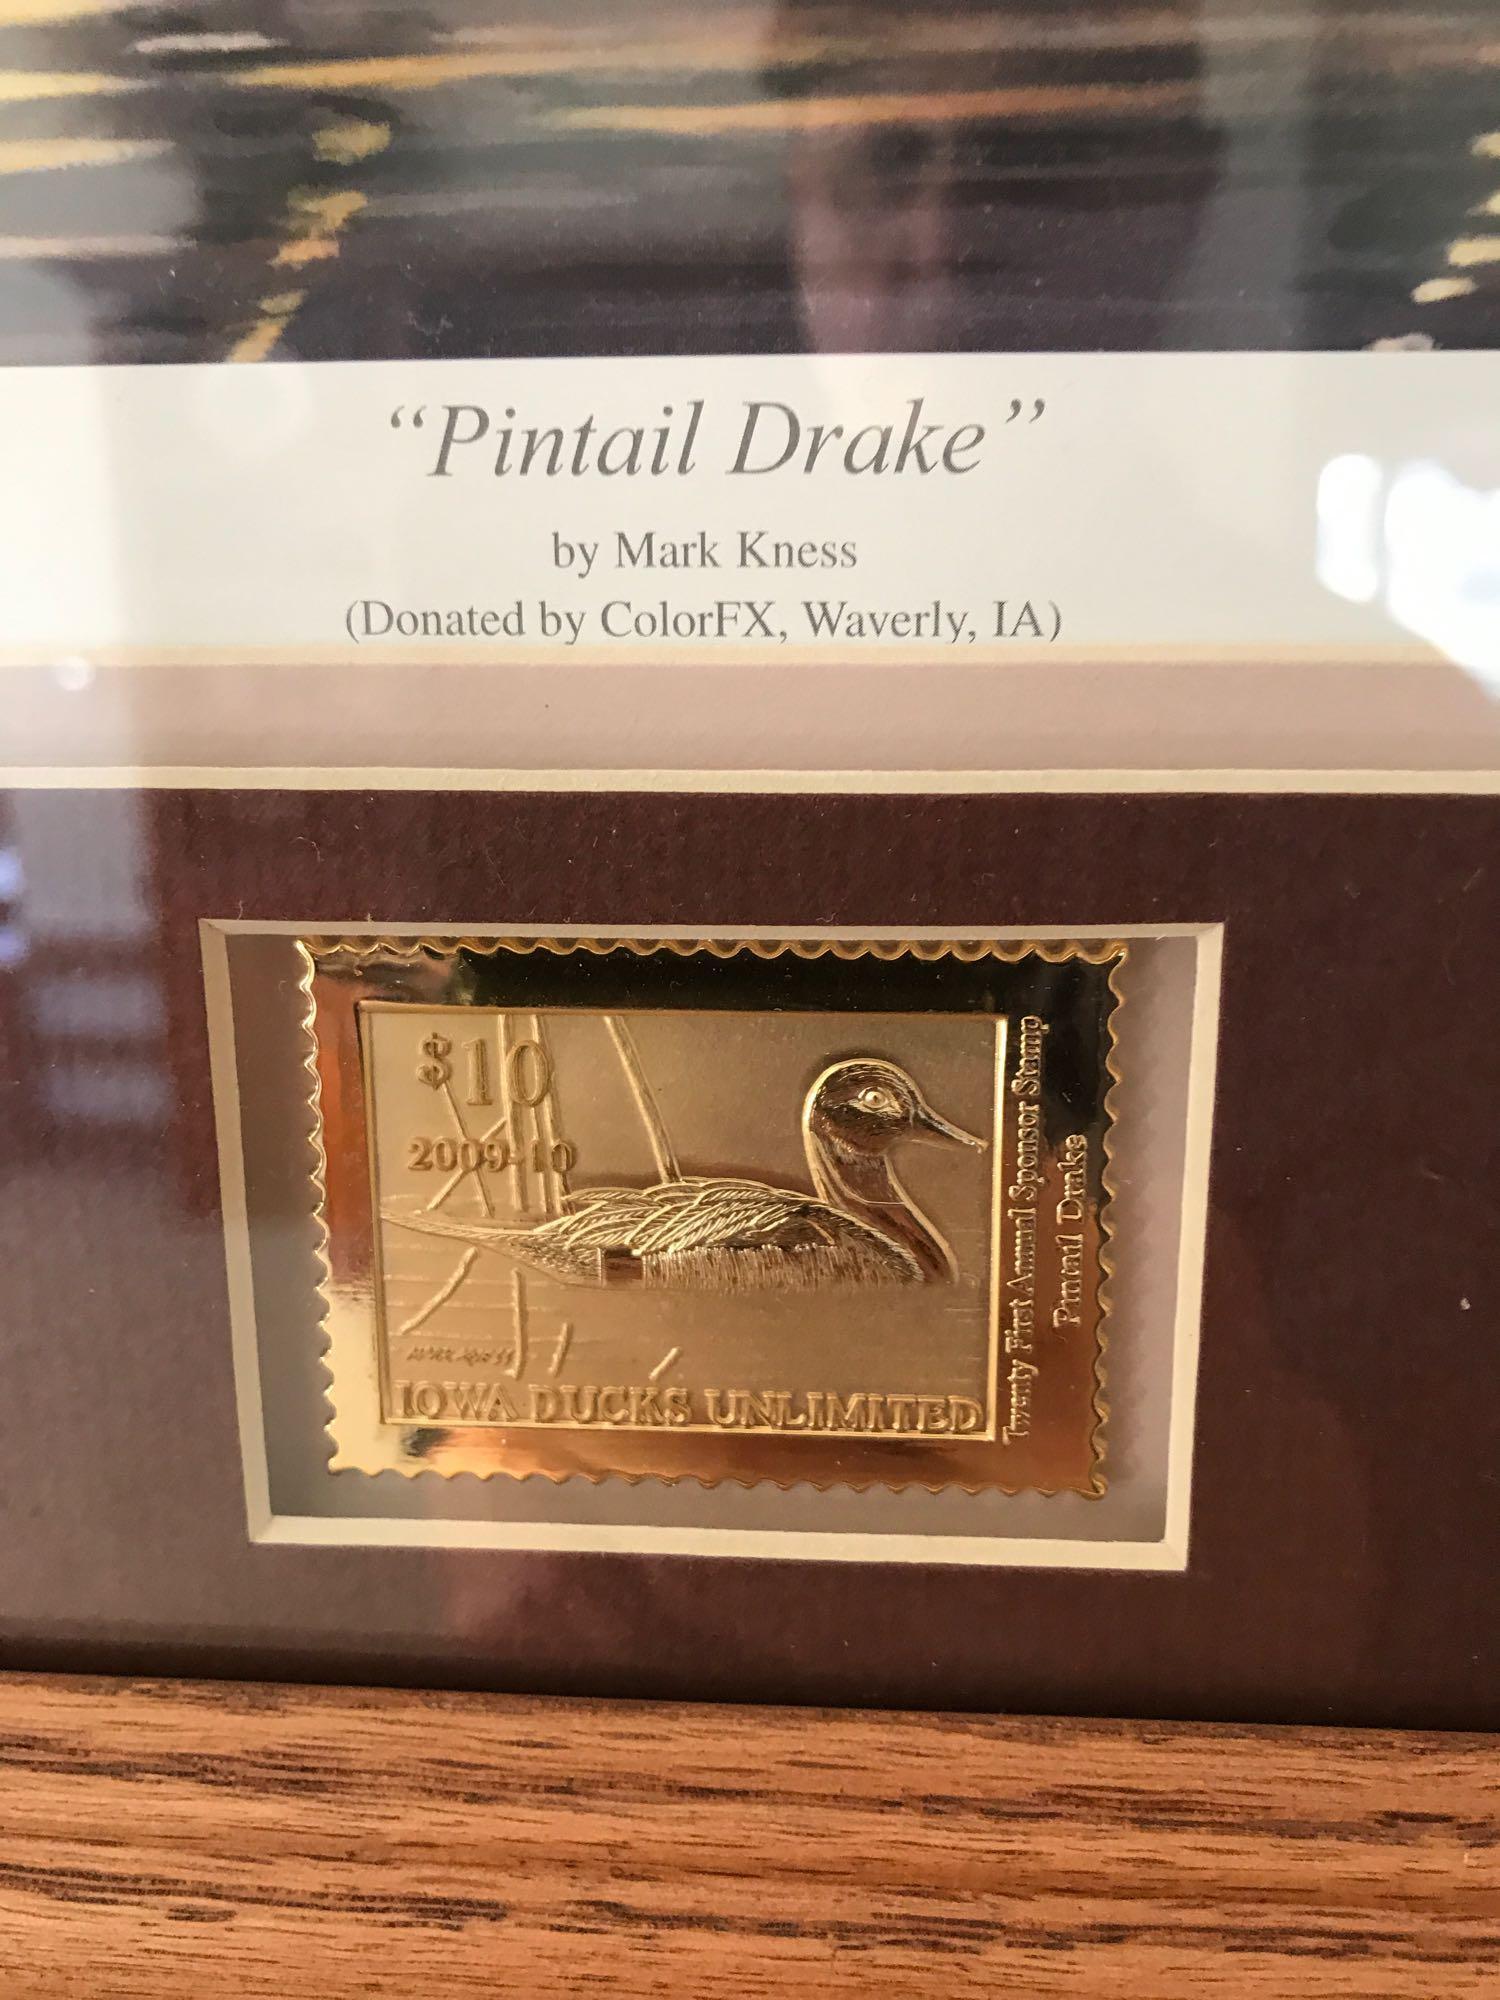 Ducks Unlimited Framed Print w/Stamps "Pintail Drake" by Mark Kness 271/2200, 20.5''x 16''